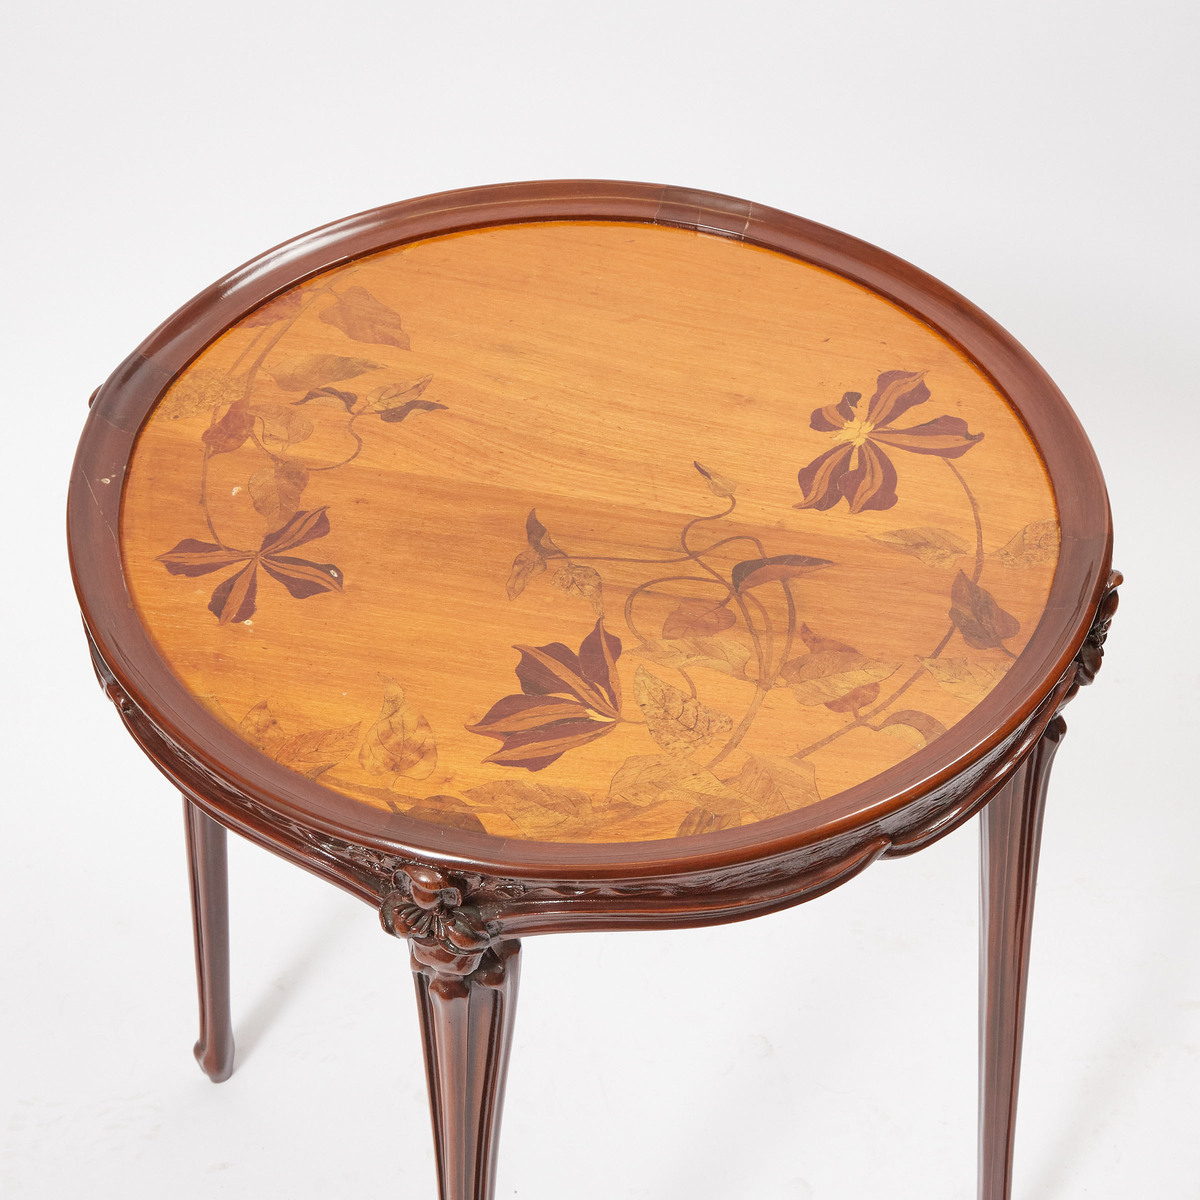 French Art Nouveau Carved Mahogany and Fruitwood Marquetry Centre or Side Table, Nancy, early 20th c - Image 2 of 2